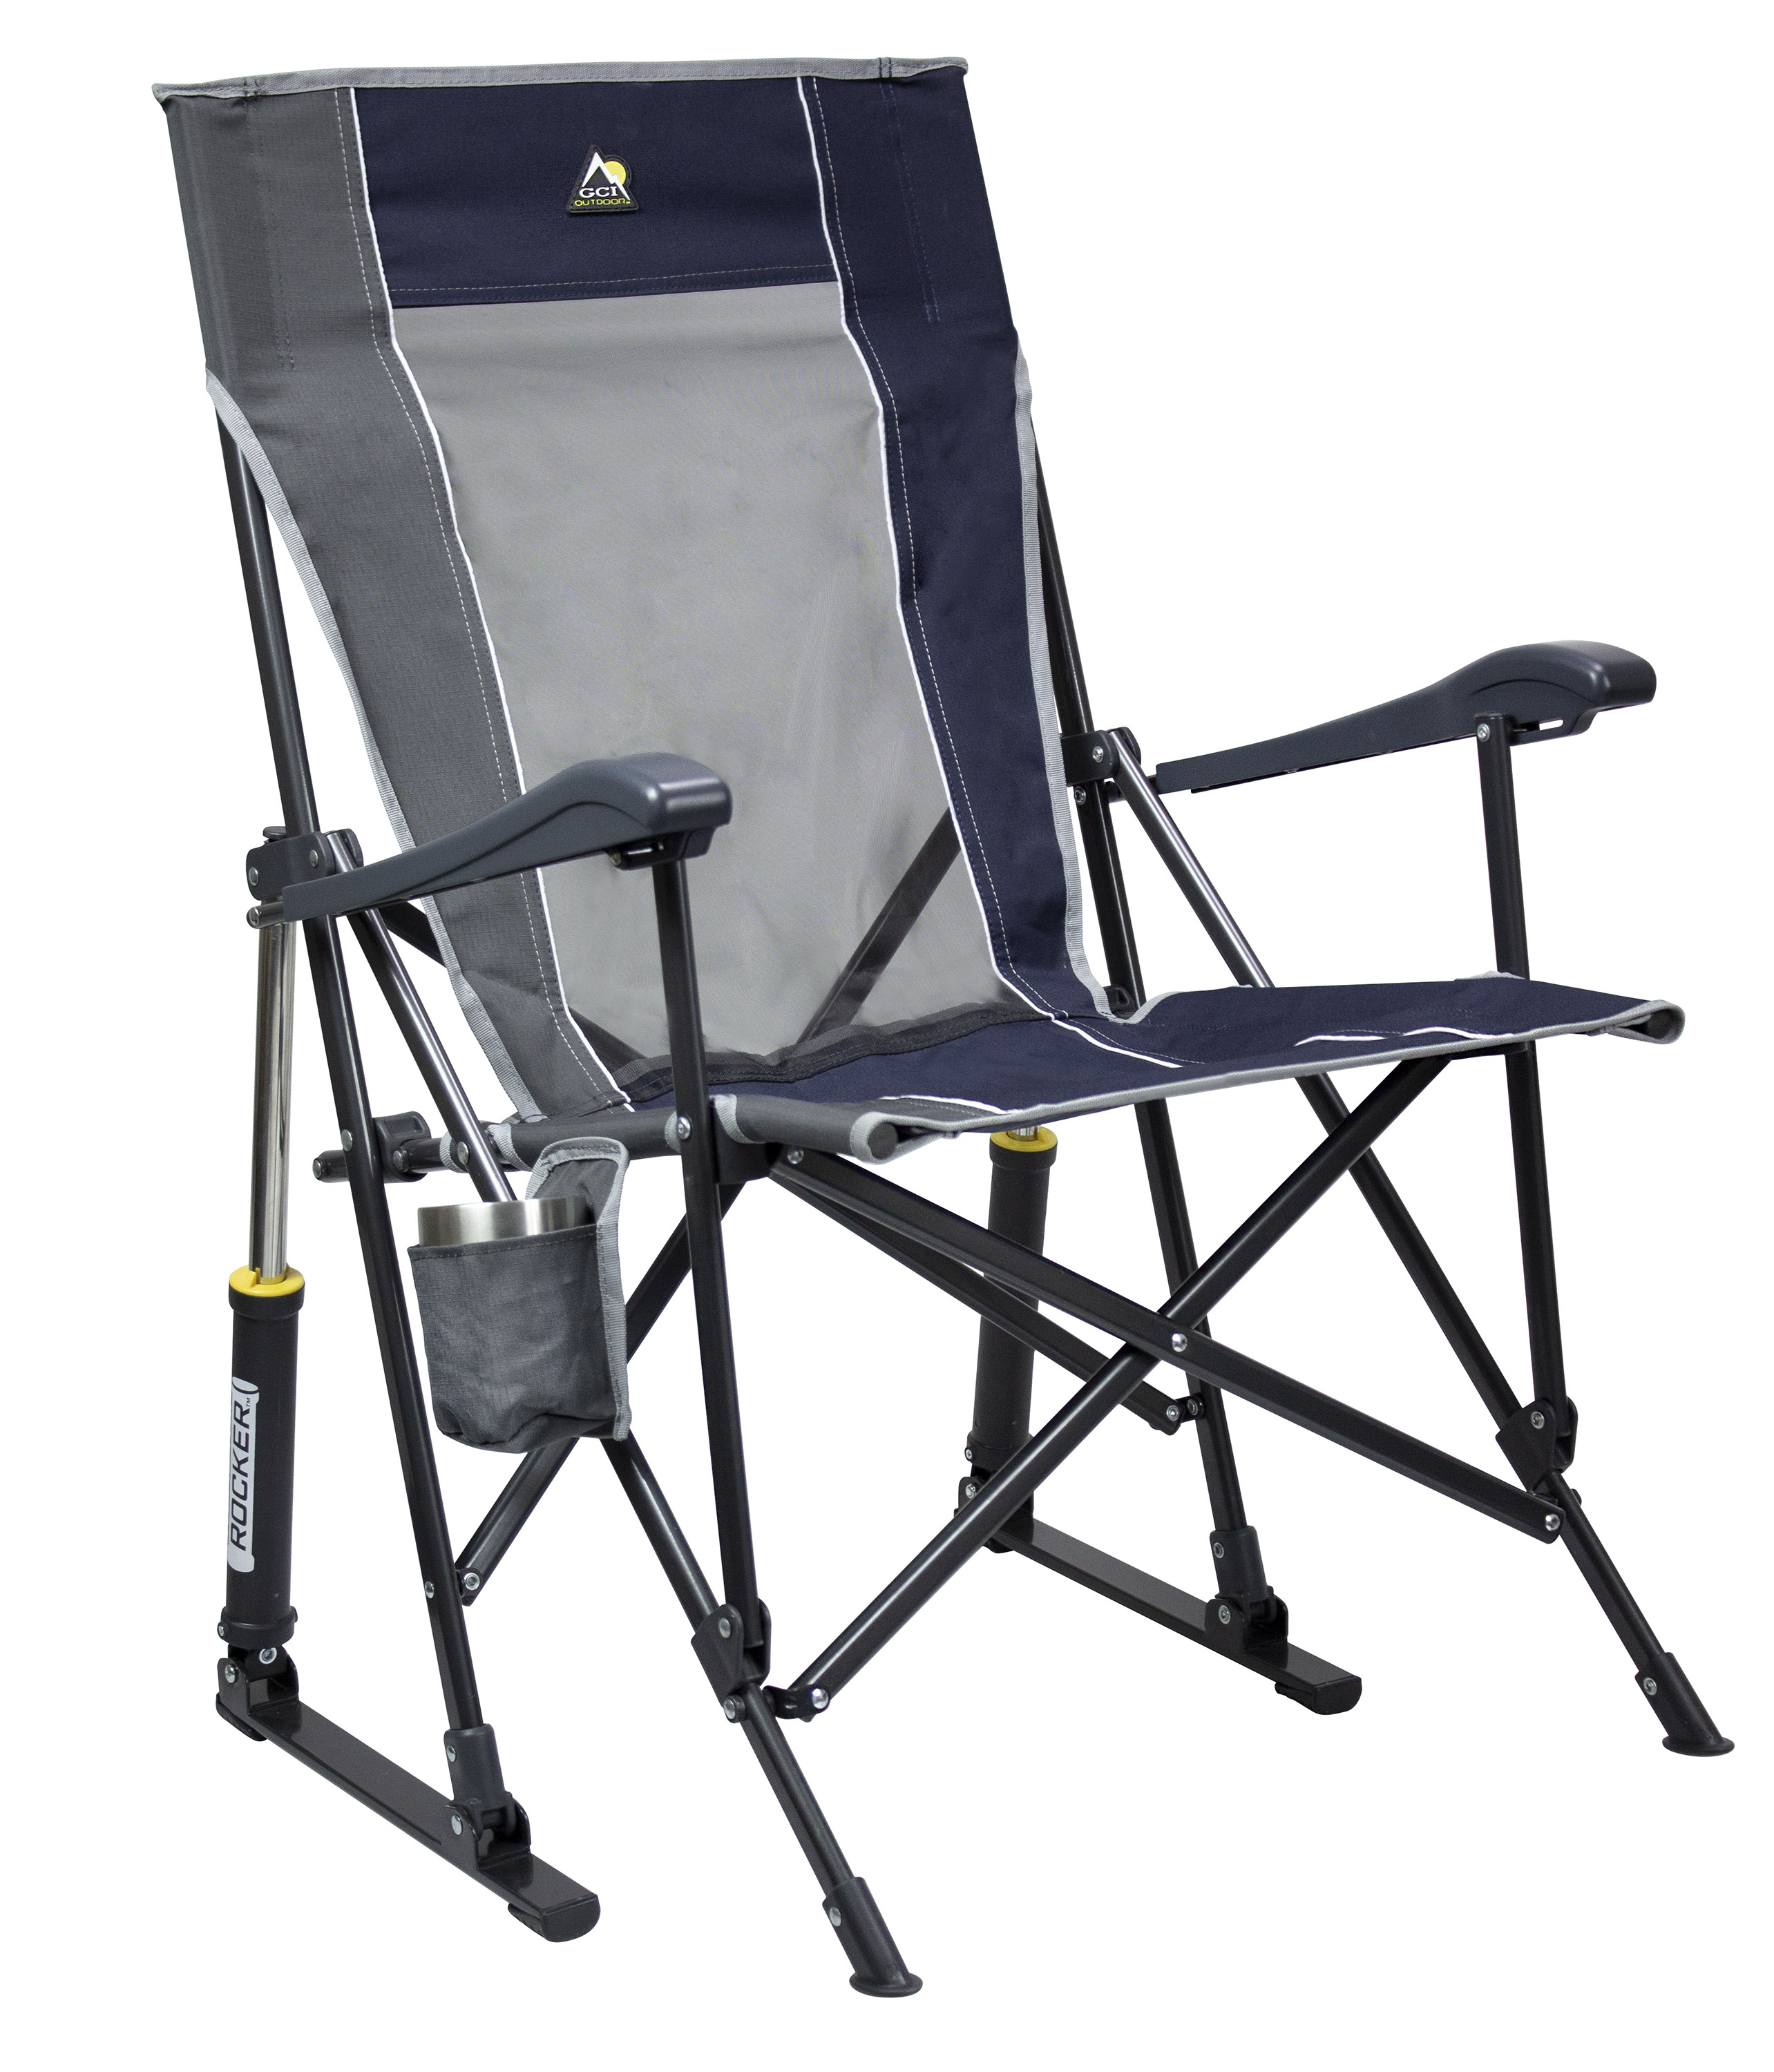 GCI Outdoor RoadTrip Rocker Foldable Rocking Camp Chair, Midnight - image 1 of 4